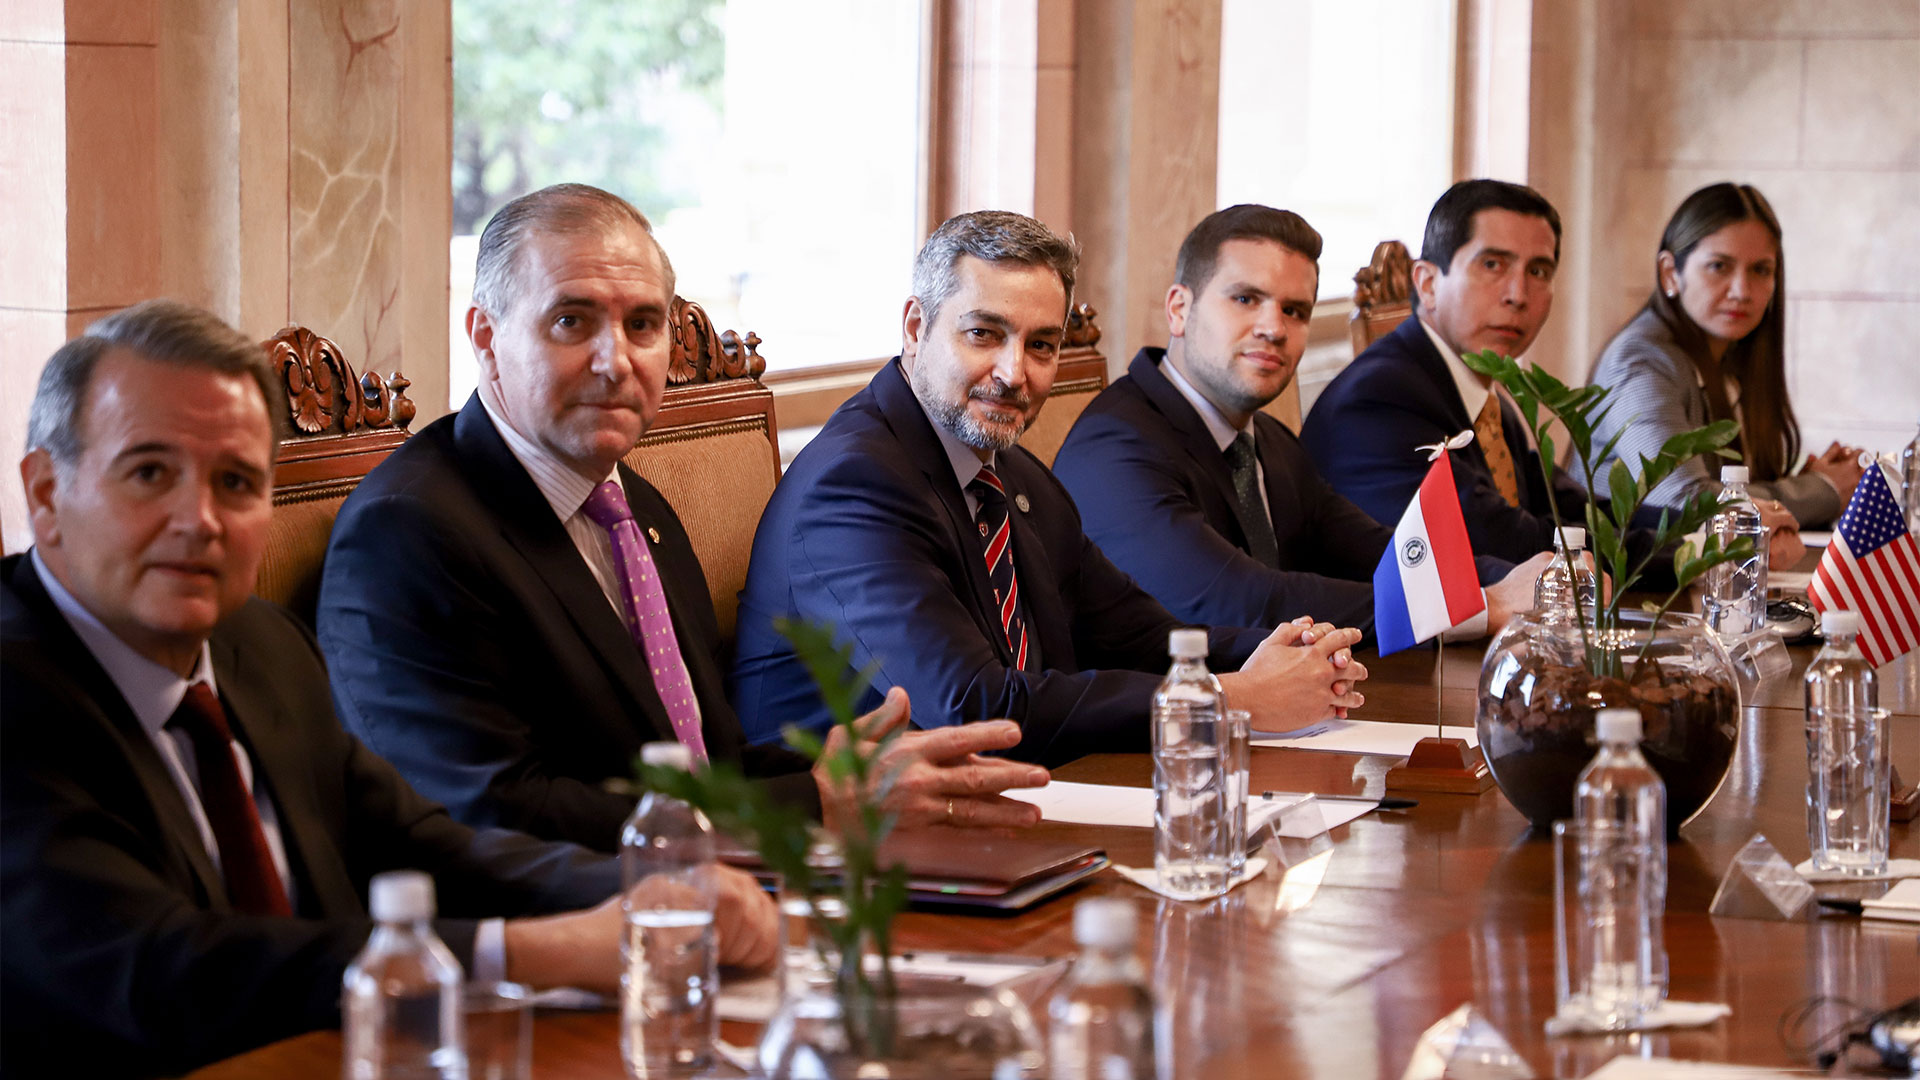 From left to right José Antonio Dos Santos, Deputy Minister of Foreign Affairs;  Julio Arriola, Minister of Foreign Affairs;  Mario Abdo Benítez, president of Paraguay;  Hernán Huttemann, Secretary General and Chief of the Civil Cabinet, and Federico González, Minister of the Interior, participate in a meeting with a delegation of congressmen from the United States (EFE/Nathalia Aguilar)